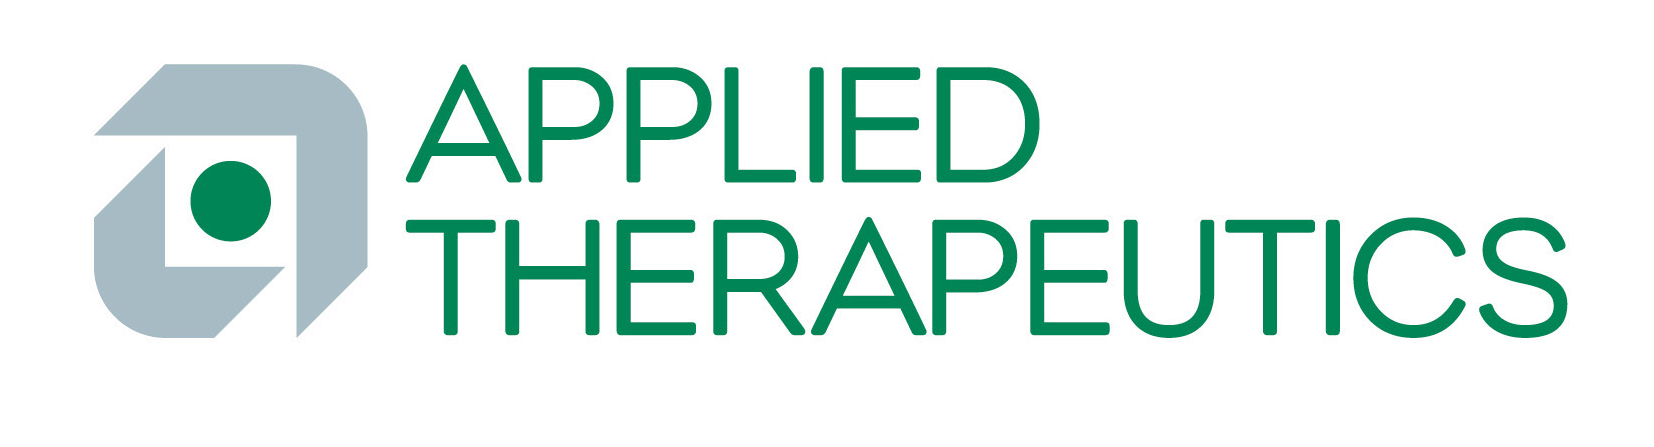 Applied Therapeutics Added to Russell 3000® Index